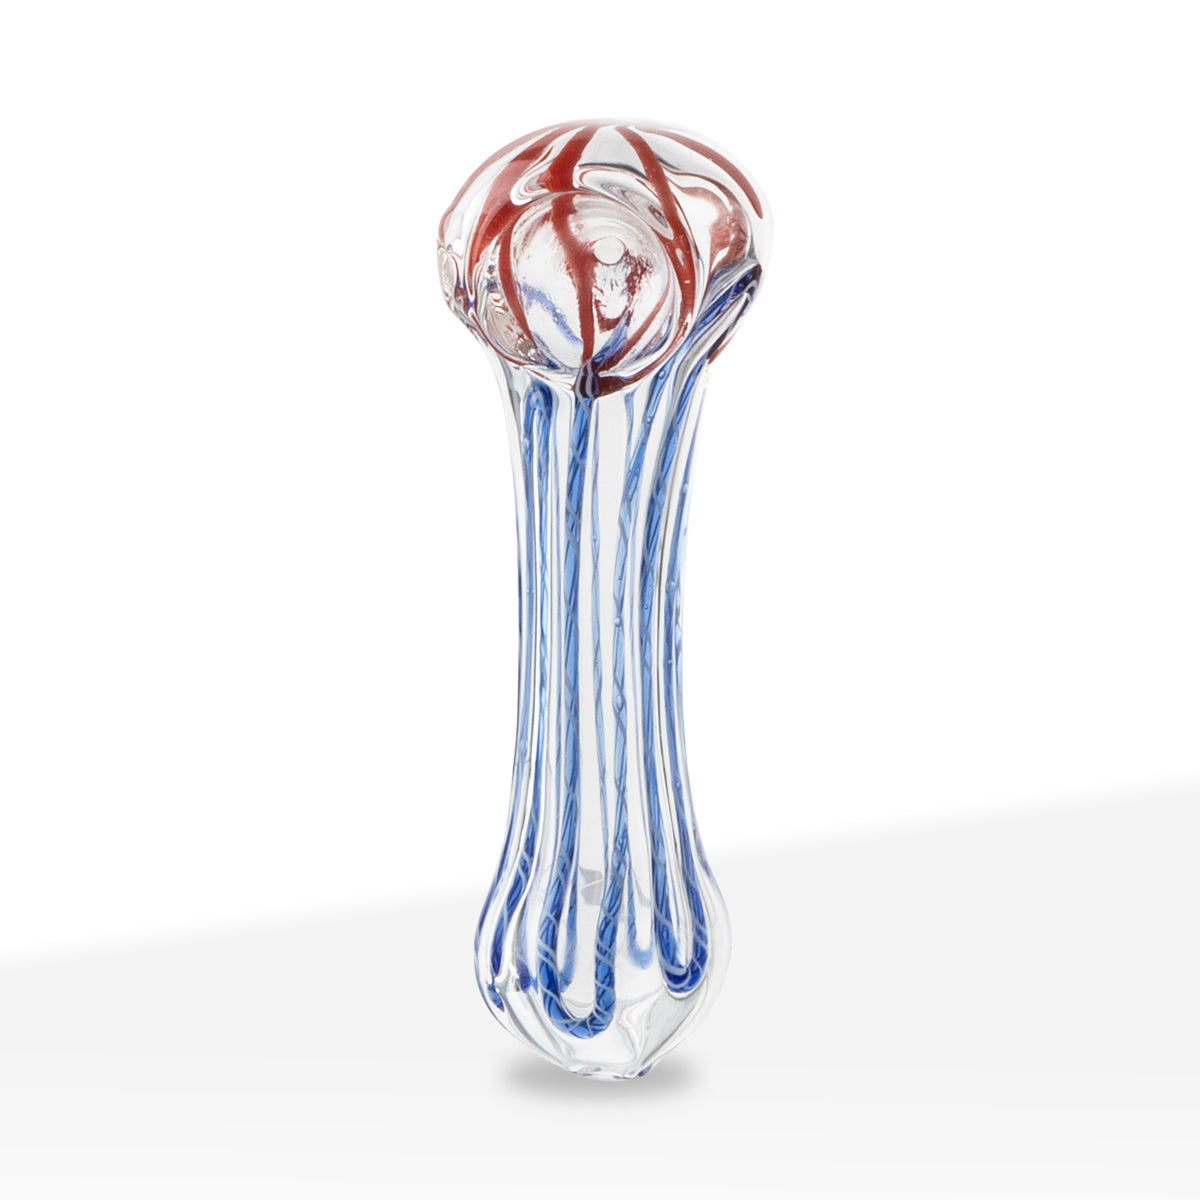 Hand Pipe | Classic Glass Spoon Candy Cane Color Swirl Hand Pipes | 5" - Glass - Assorted Colors - 10 Count